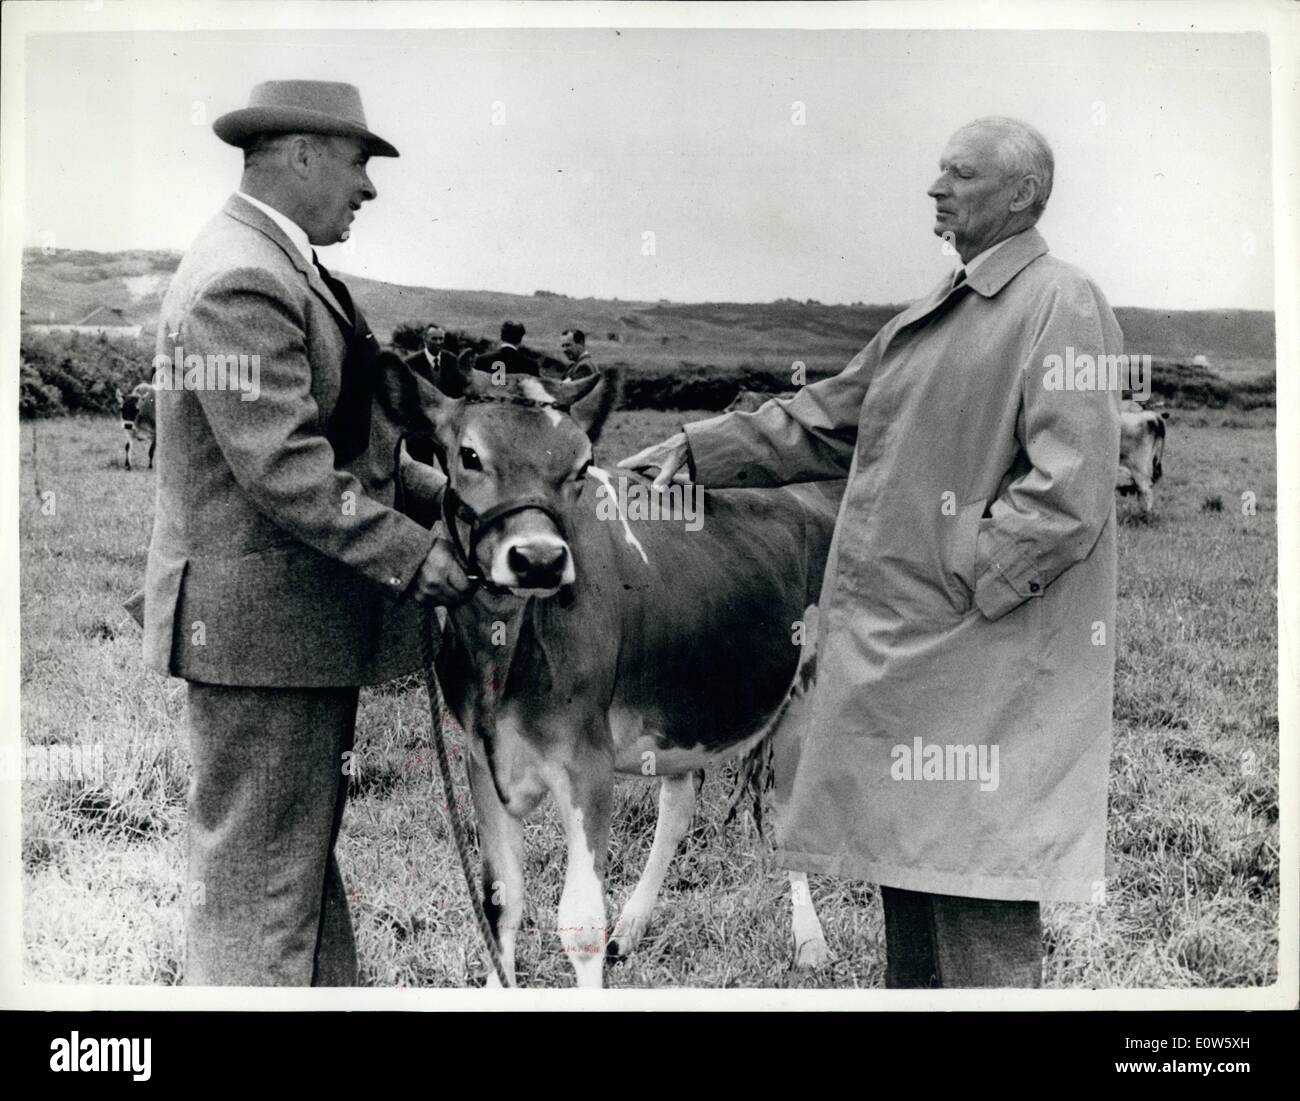 Jul. 07, 1961 - Mont Discovers Another Kind Of ''Bull'' - Not The Army Kind, But The Real Live Stuff: Lord Montgomery, not unfamiliar with the bull of Army life, is introduced to a Jersey bull while visiting the island of Jersey. The bull is a young champion owned by Jack A'Court, of the Mount, St. Ouen, Jersey. Photo Shows Lord Montgomery (right) the bull and Mr. A'Court. Stock Photo